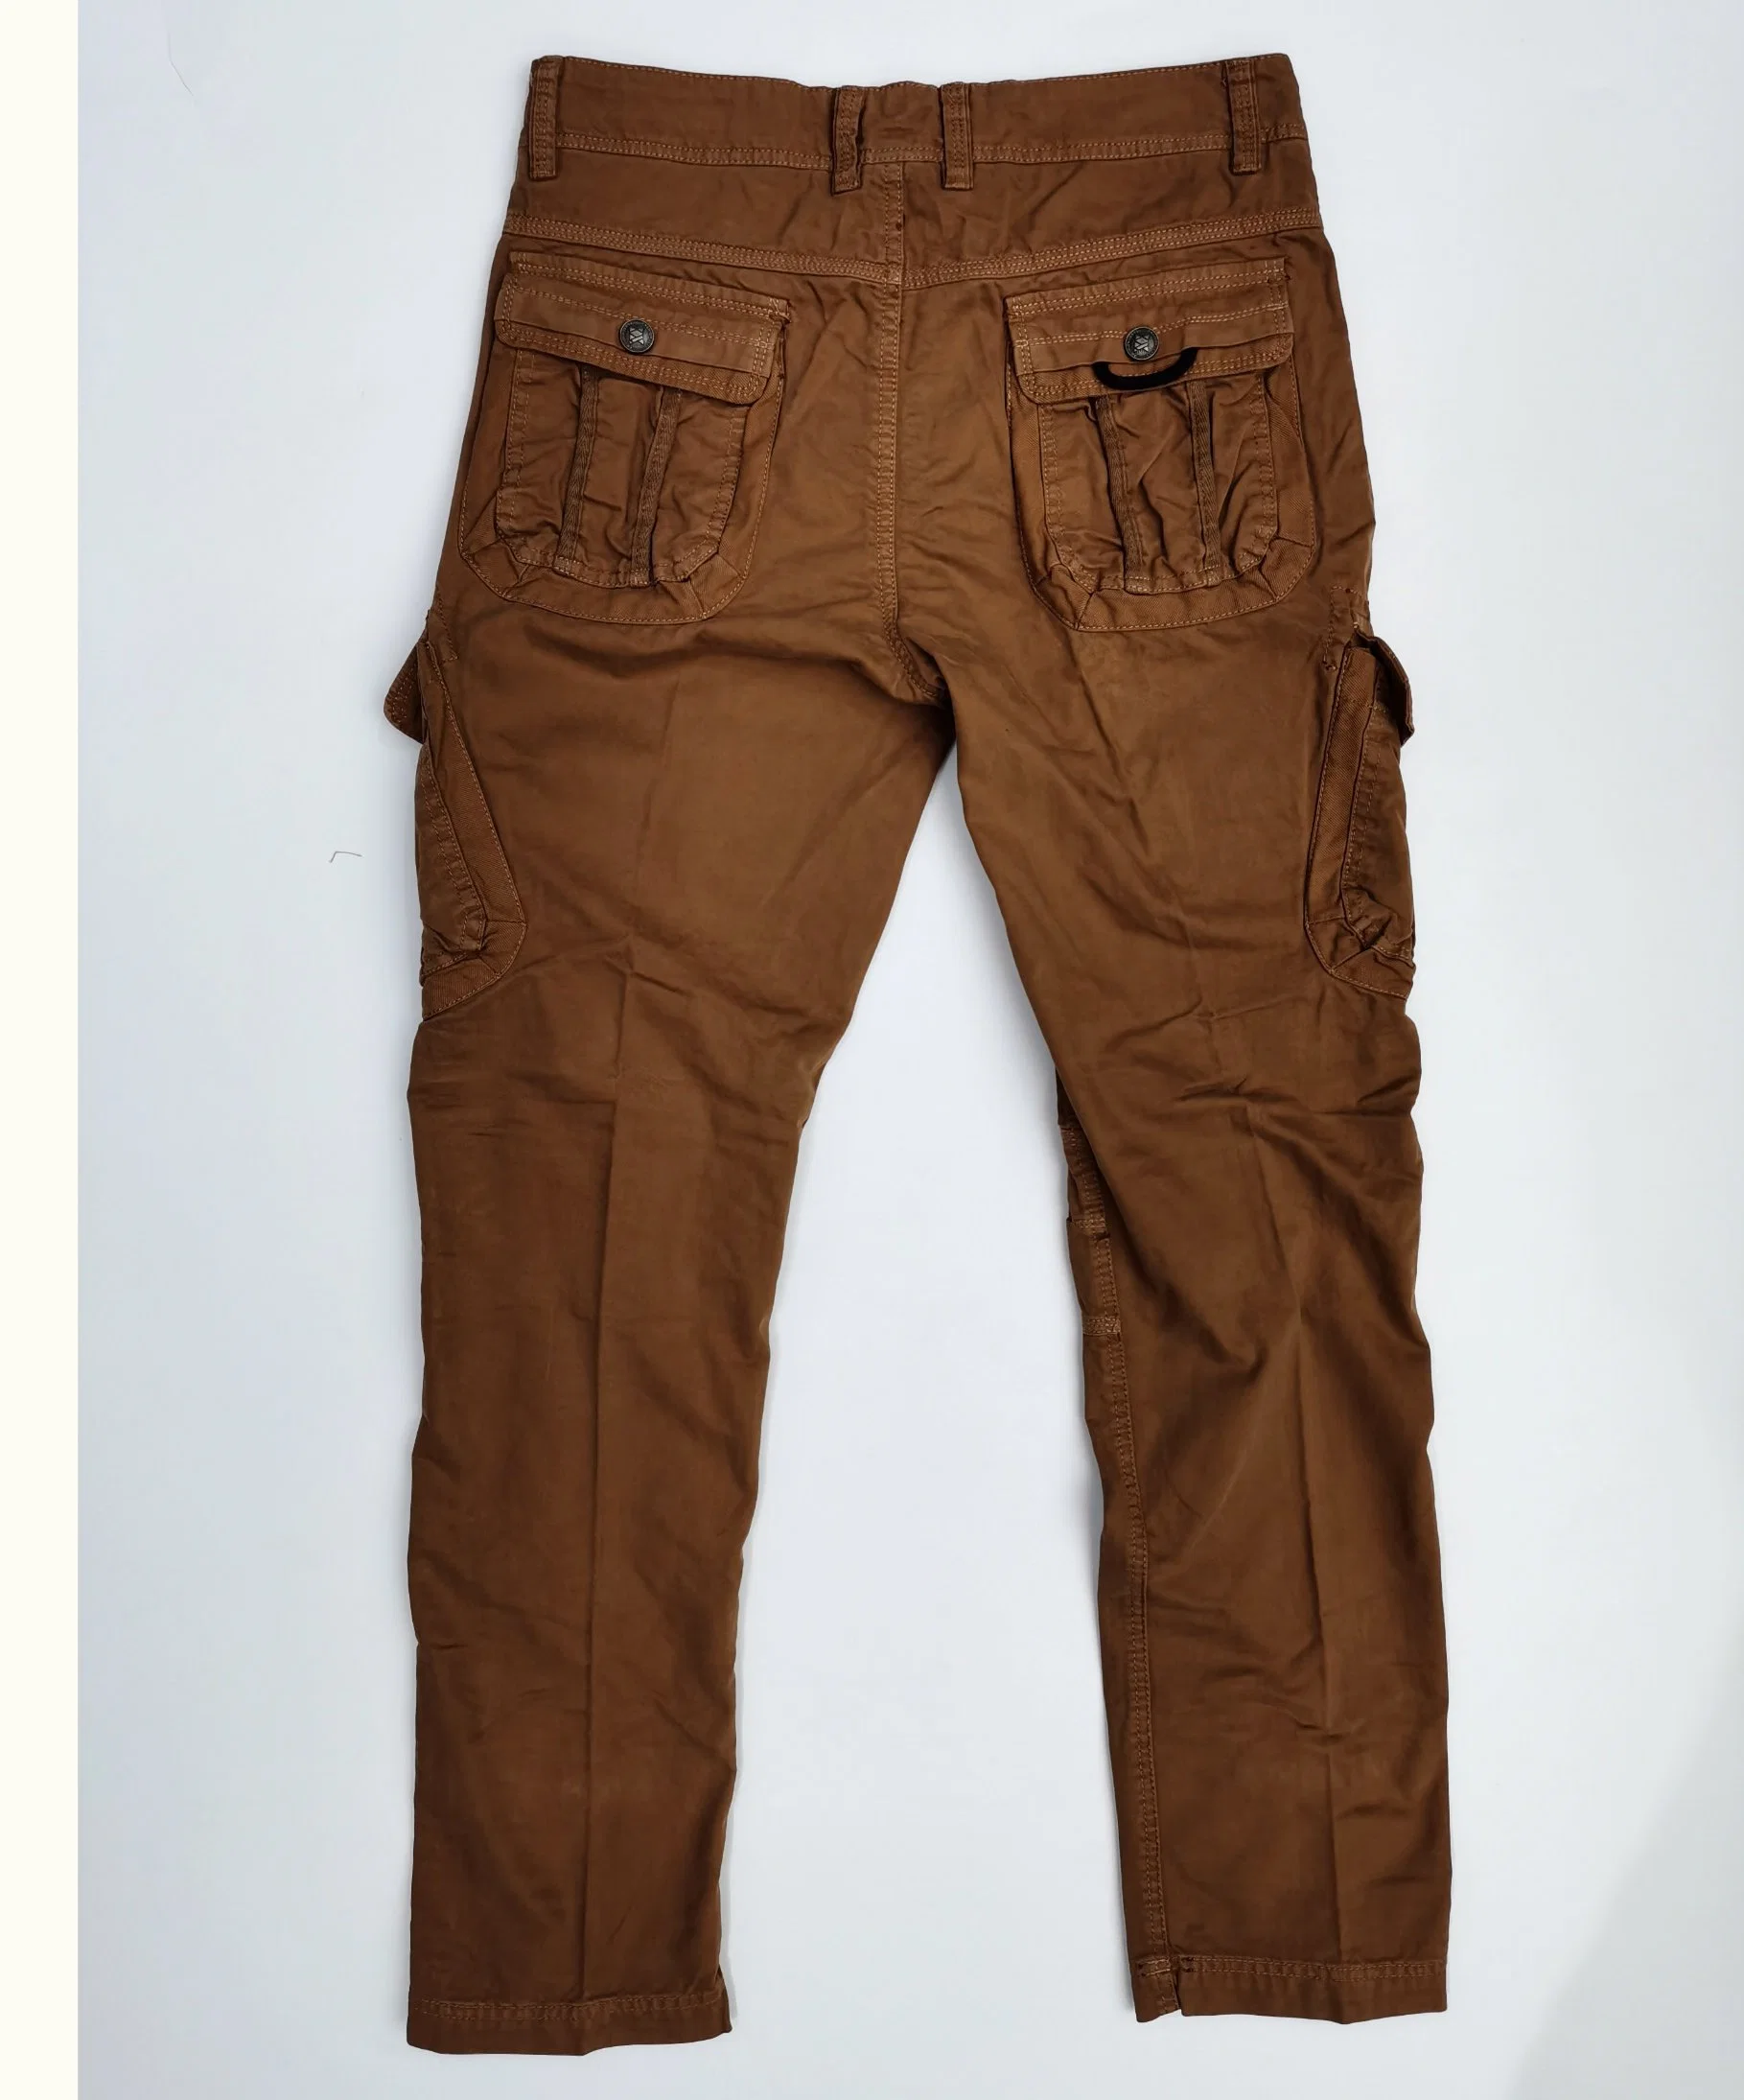 Men's Casual Safety Work Wear Stretch Multi-Cargo Pants